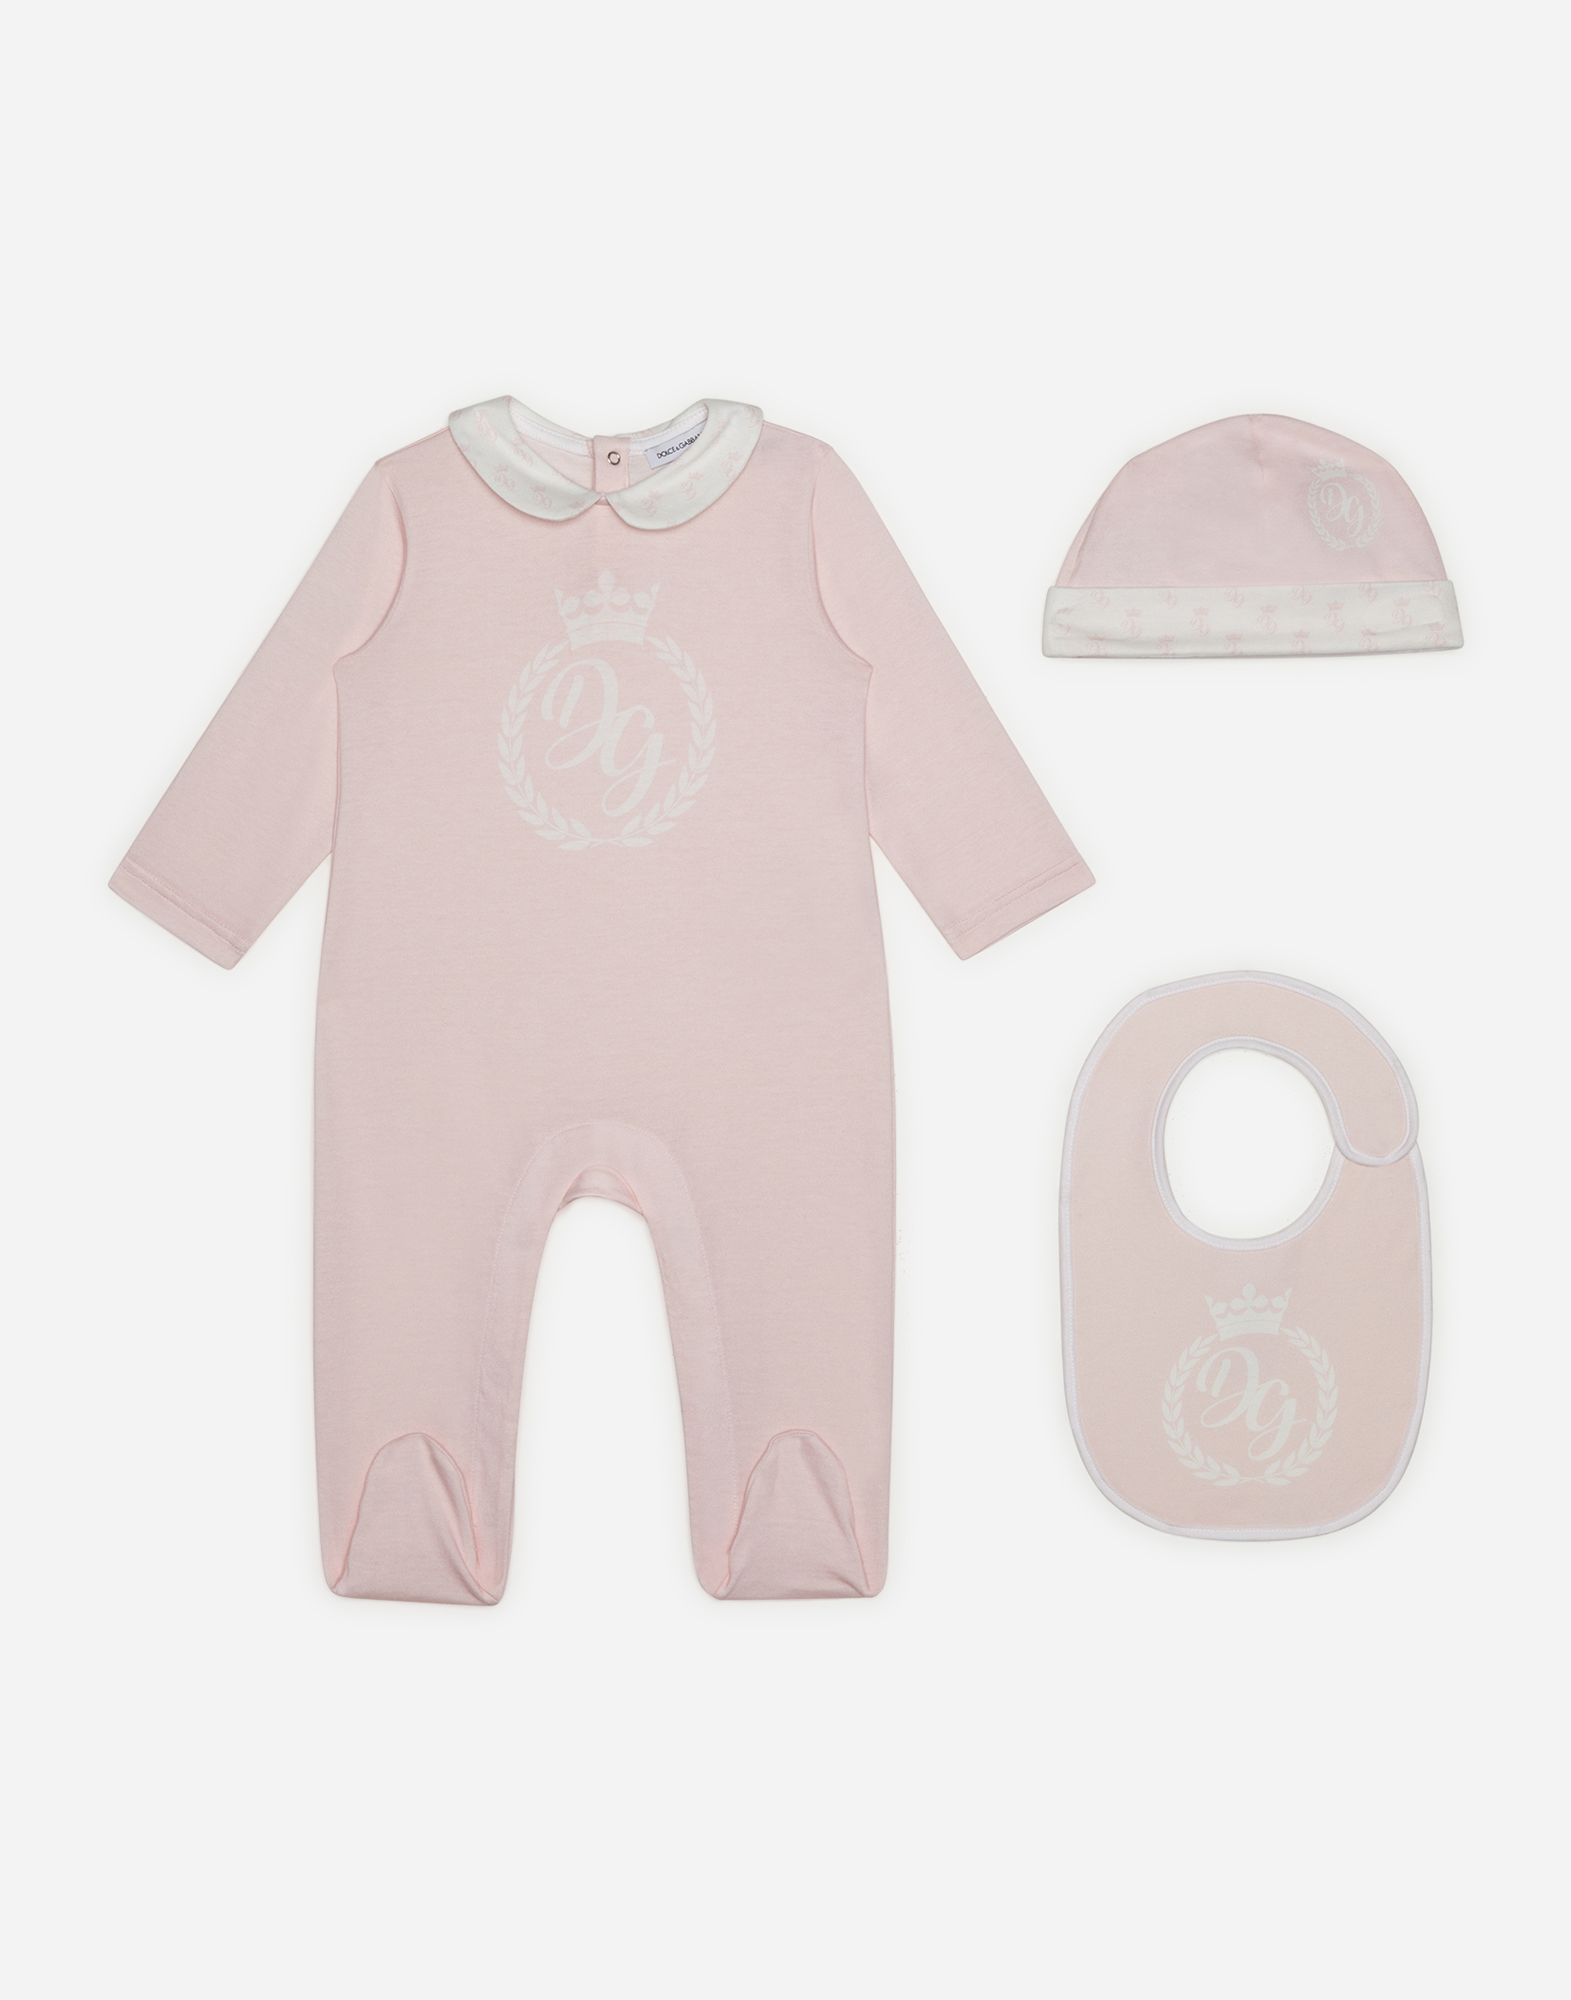 Dolce & Gabbana Babies' 3 Piece Gift Set In Jersey With Pink Dg Print